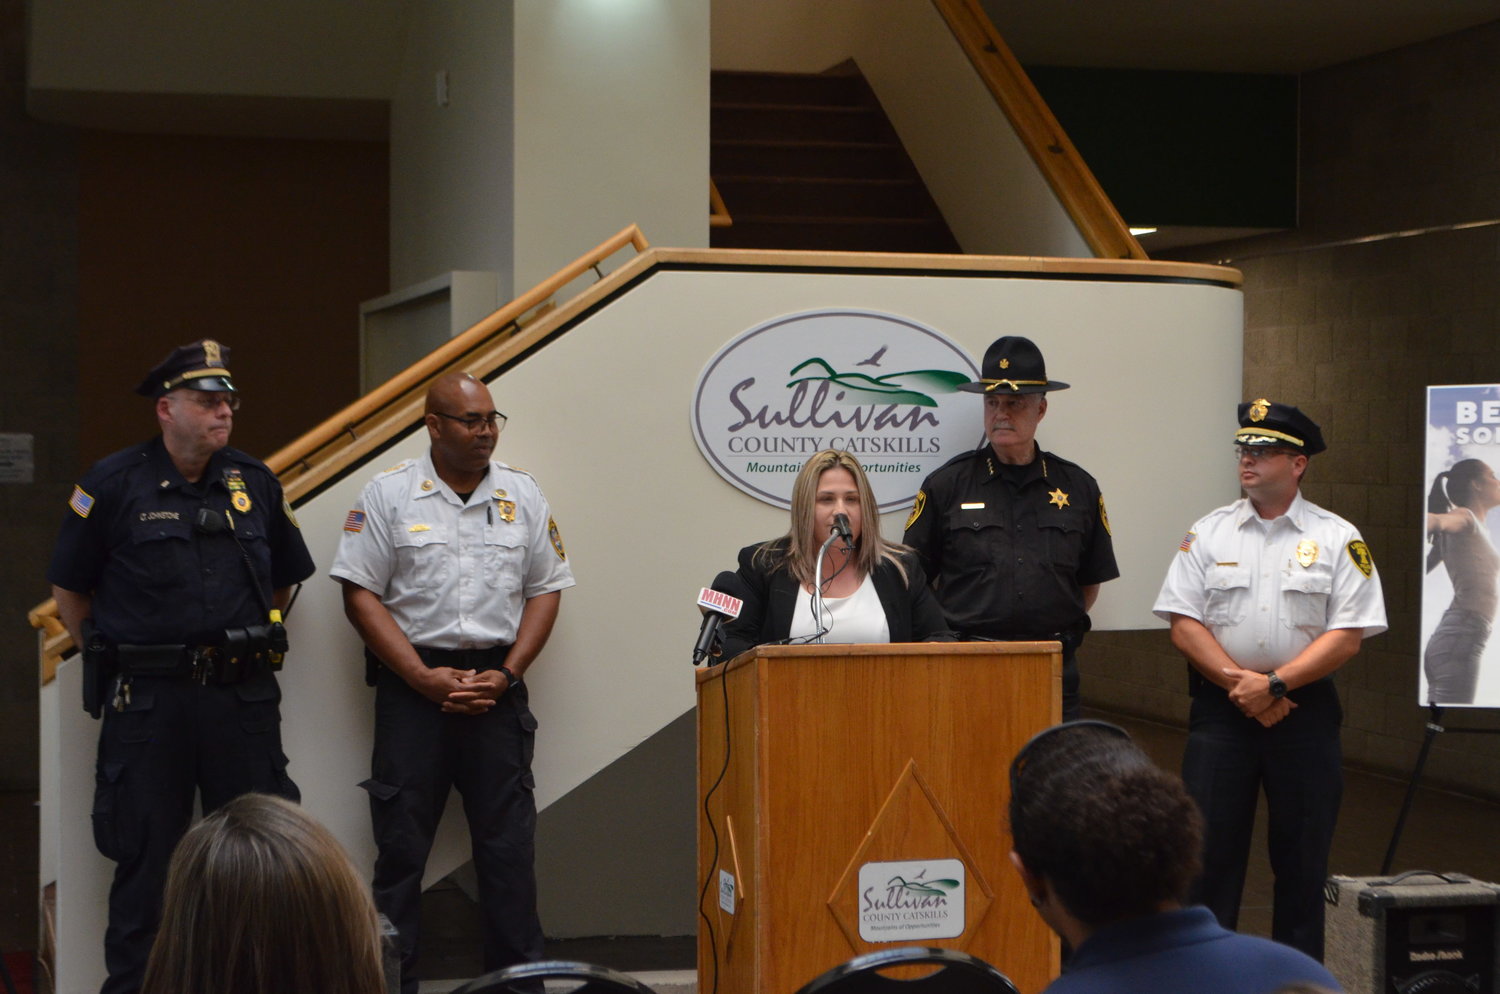 Sullivan County District Attorney Meagan Galligan describes the path to treatment offered by Hope Not Handcuffs, flanked by members of Sullivan County Law Enforcement.